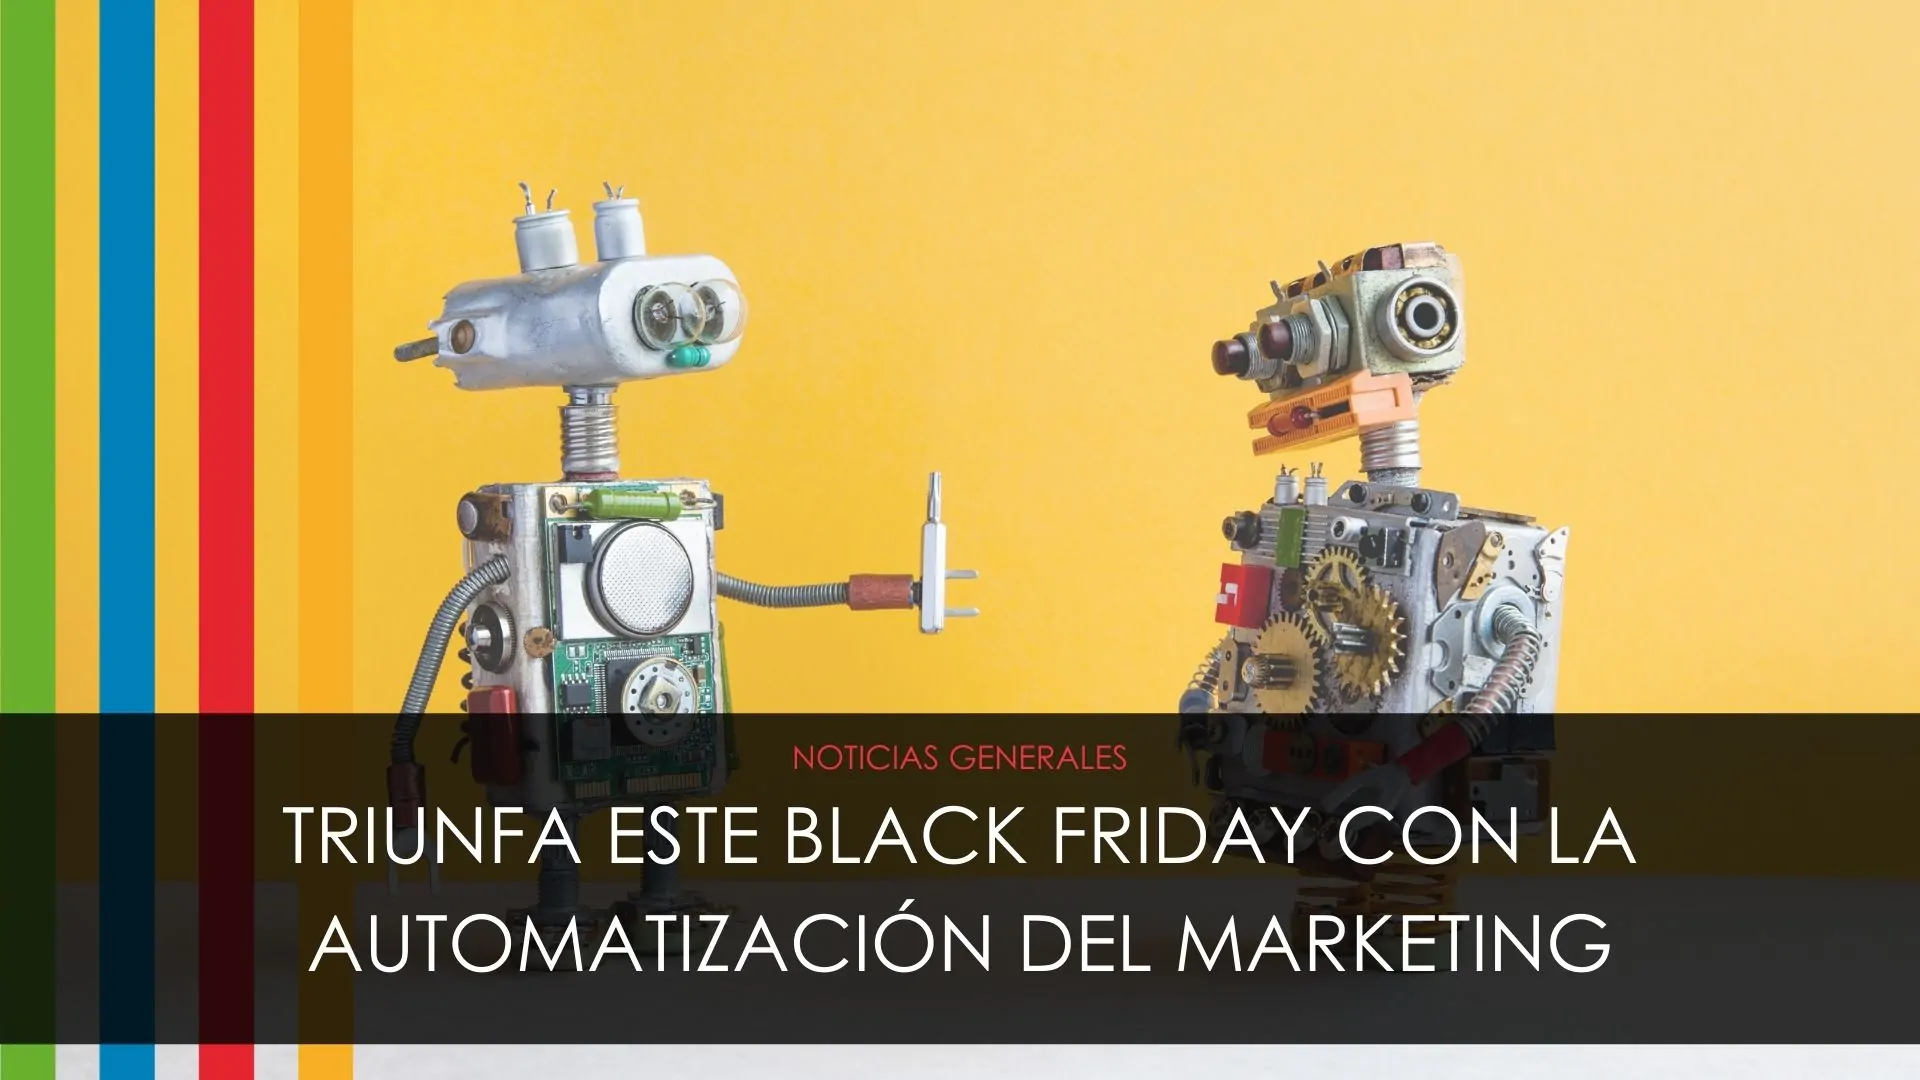 Succeed this Black Friday with Marketing Automation